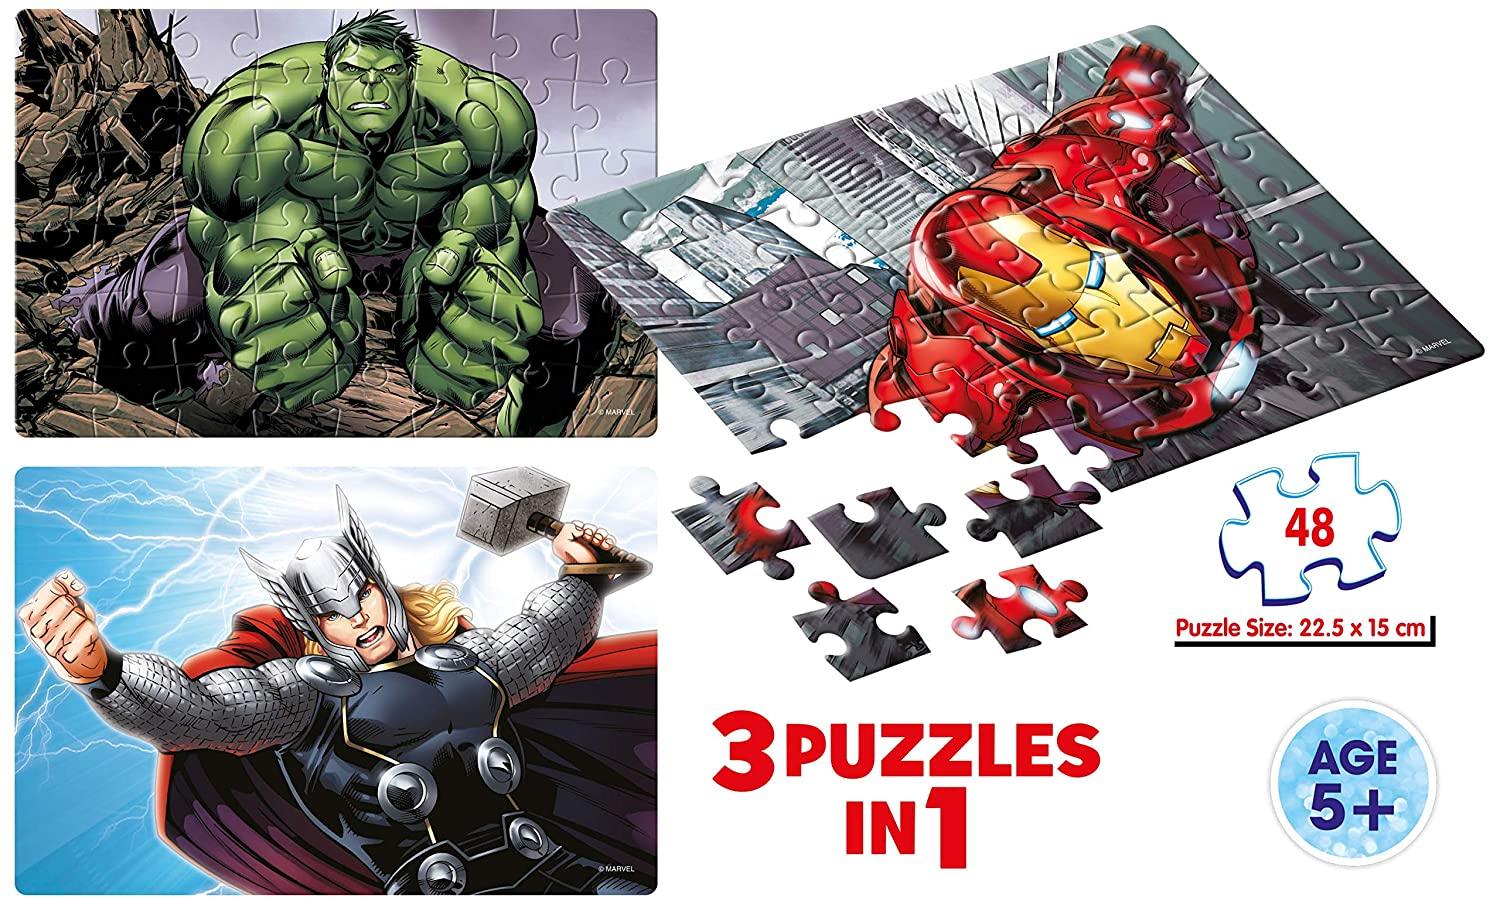 Frank Marvel Avengers 3 Puzzles in 1 - A Set of 3 48 Pc Jigsaw Puzzles for 5 Year Old Kids and Above